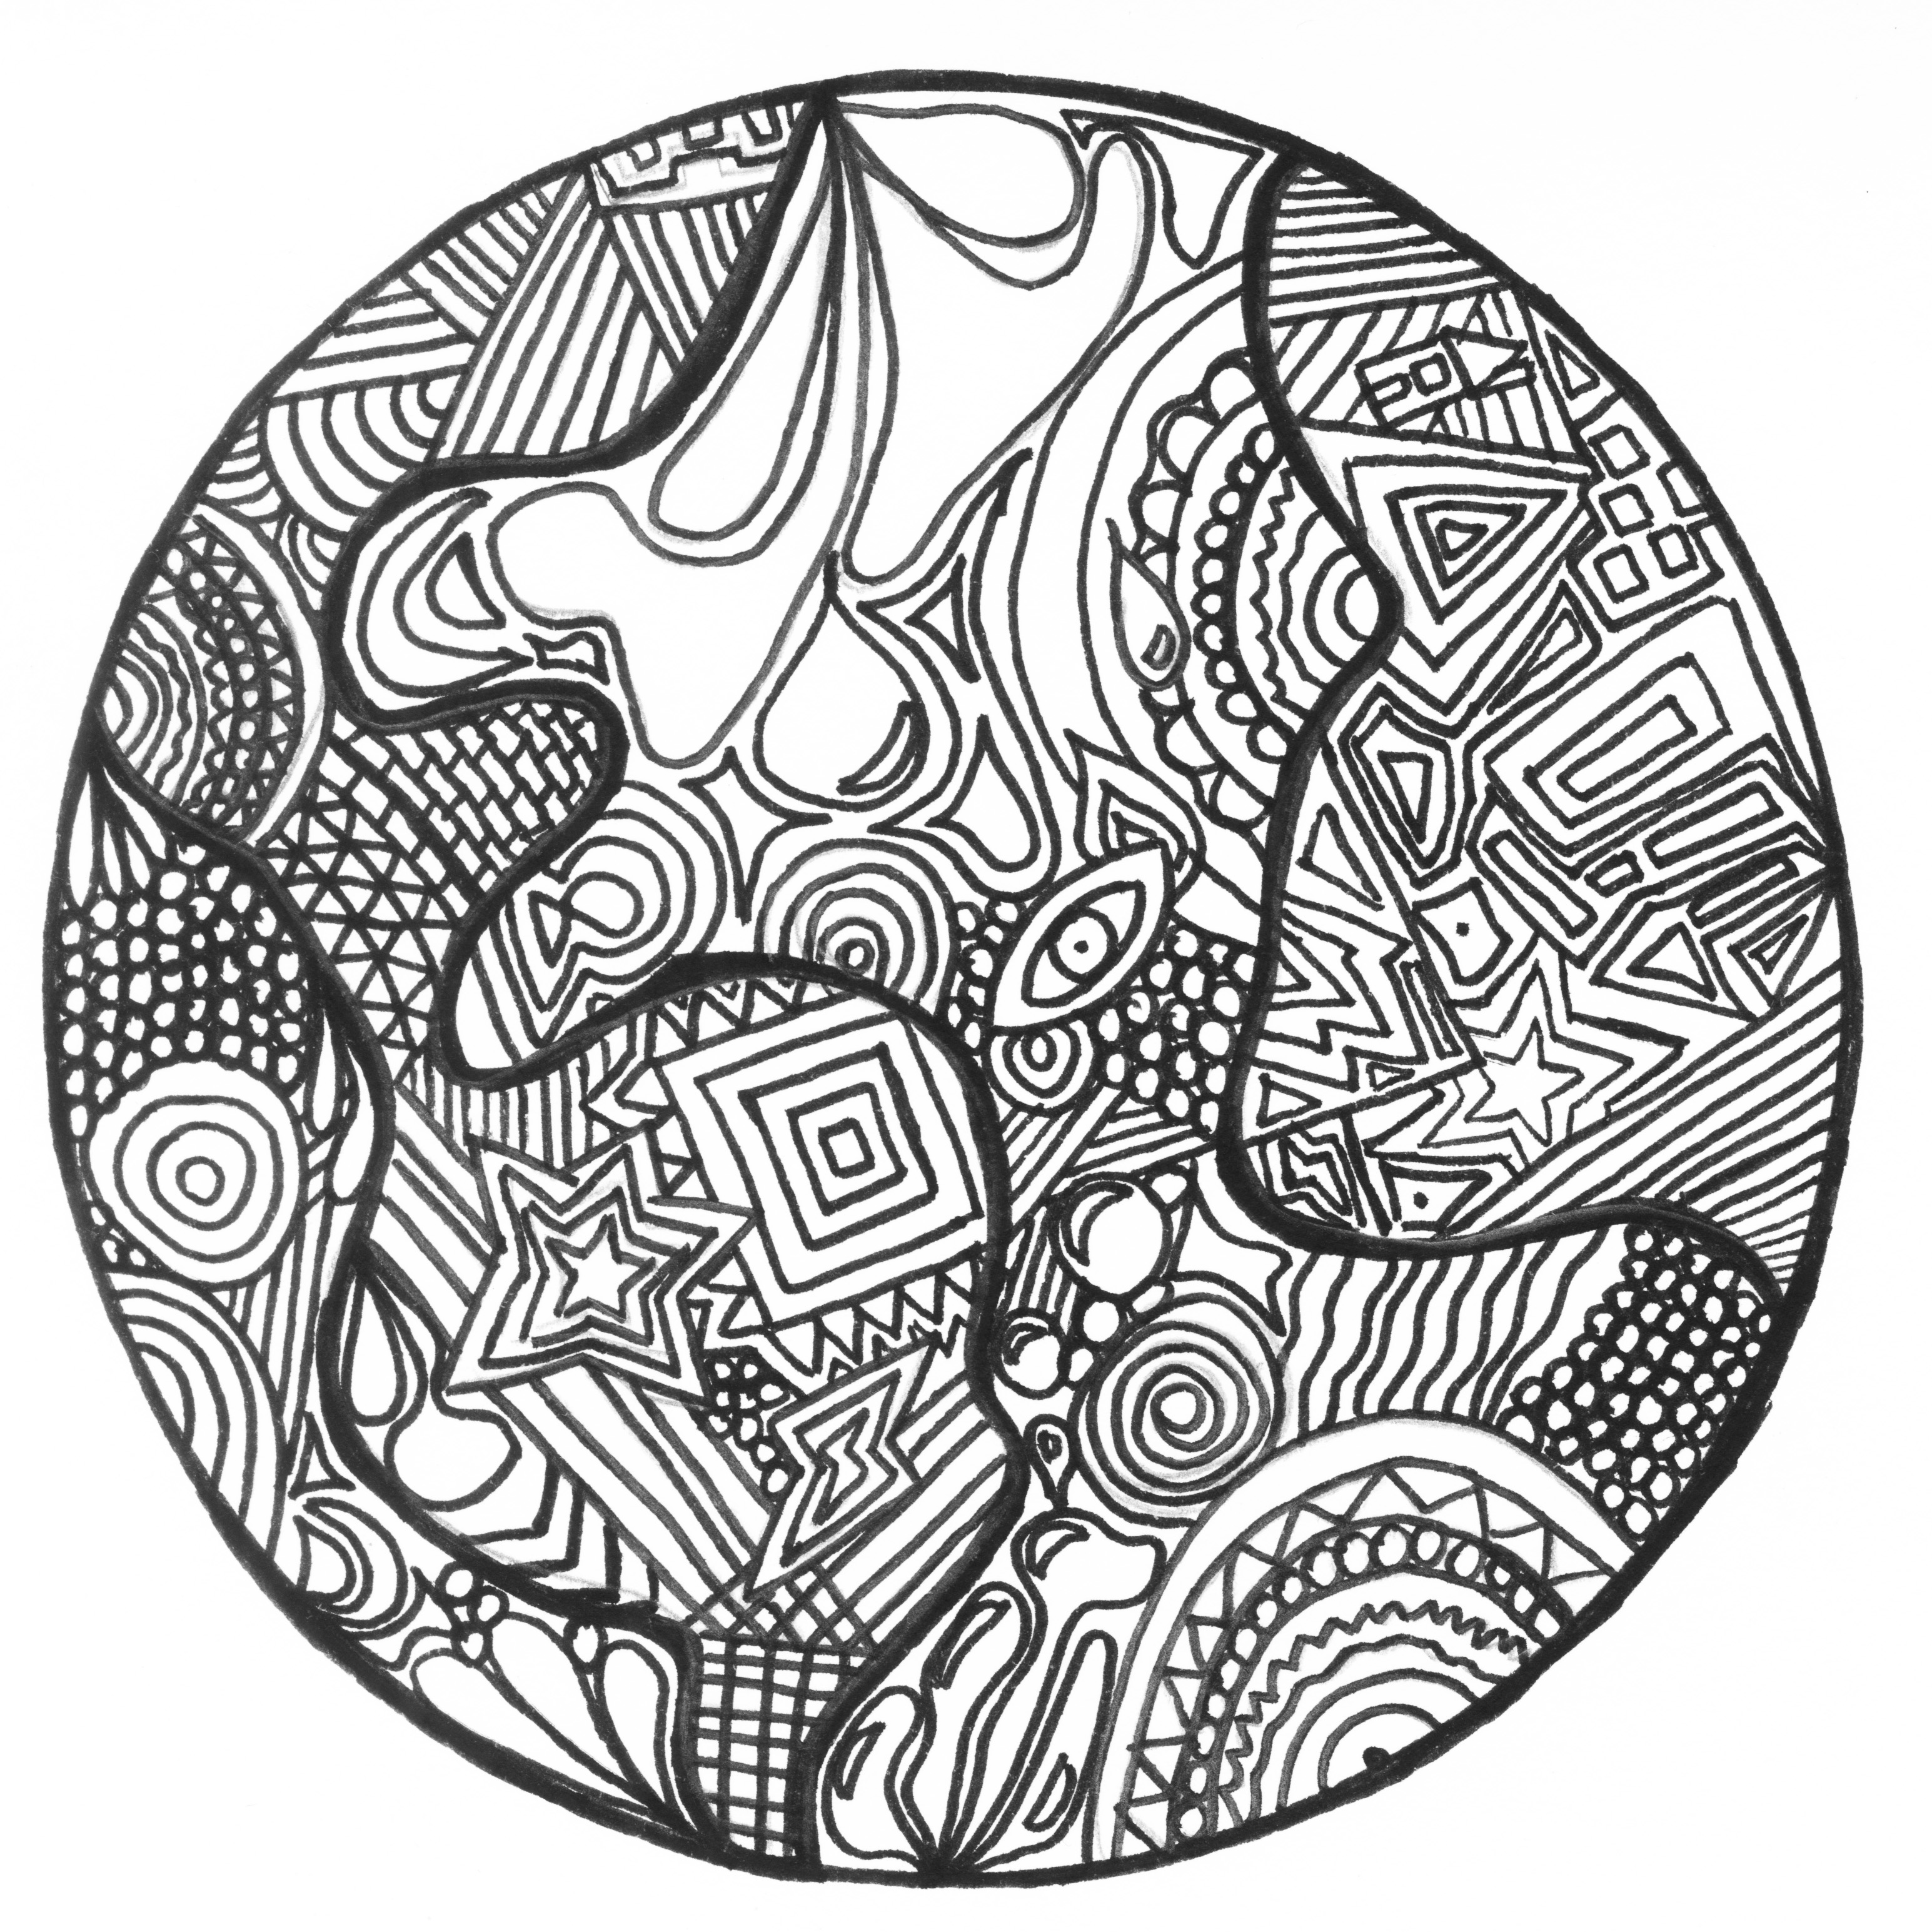 A planet drawn in the Zentangle way!. The details of this imaginary planet are abstract and inspired by Zentangle patterns.